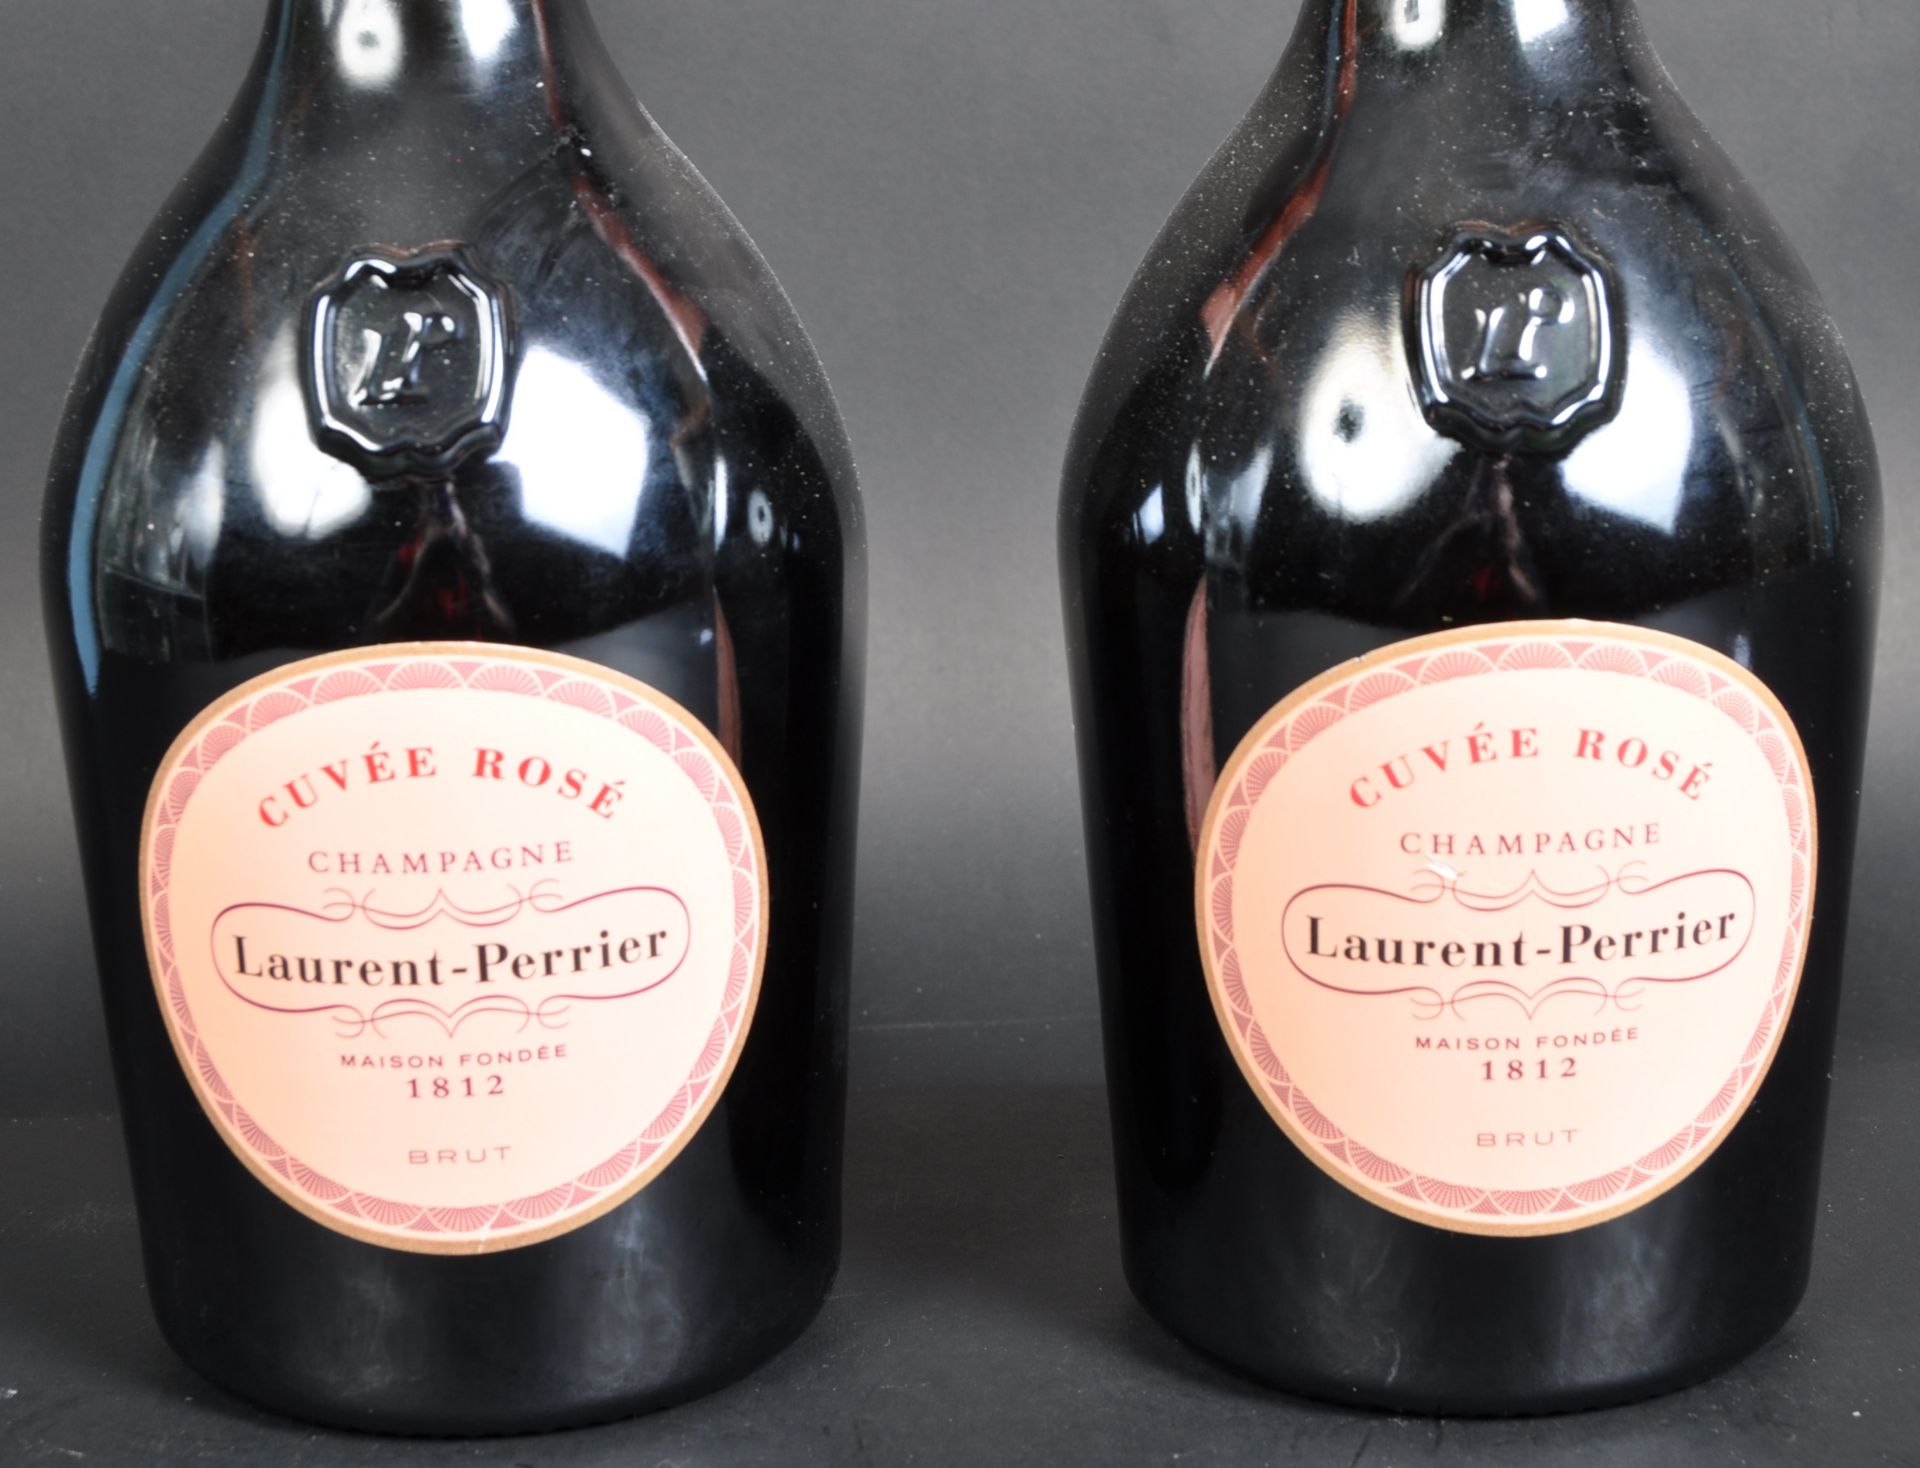 TWO BOTTLES OF 750ML LAURENT-PERRIER CUVEE ROSE CHAMPAGNE - Image 4 of 4